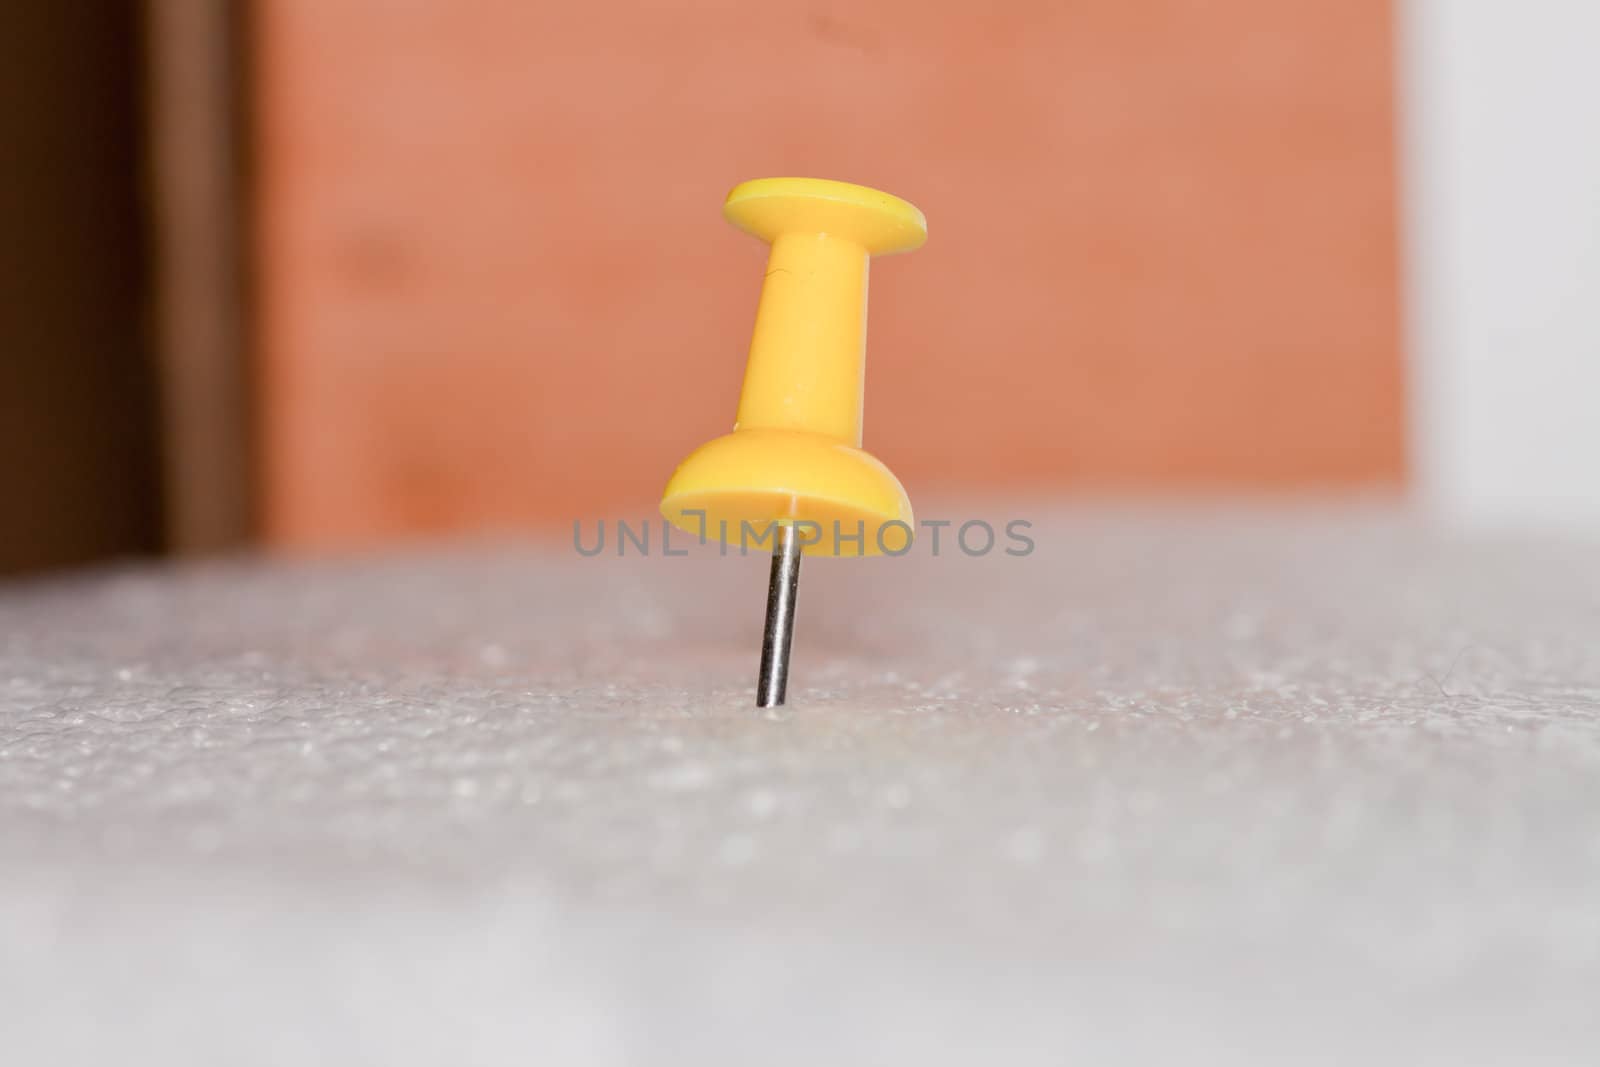 thumbtack isolated on a white background by nikky1972